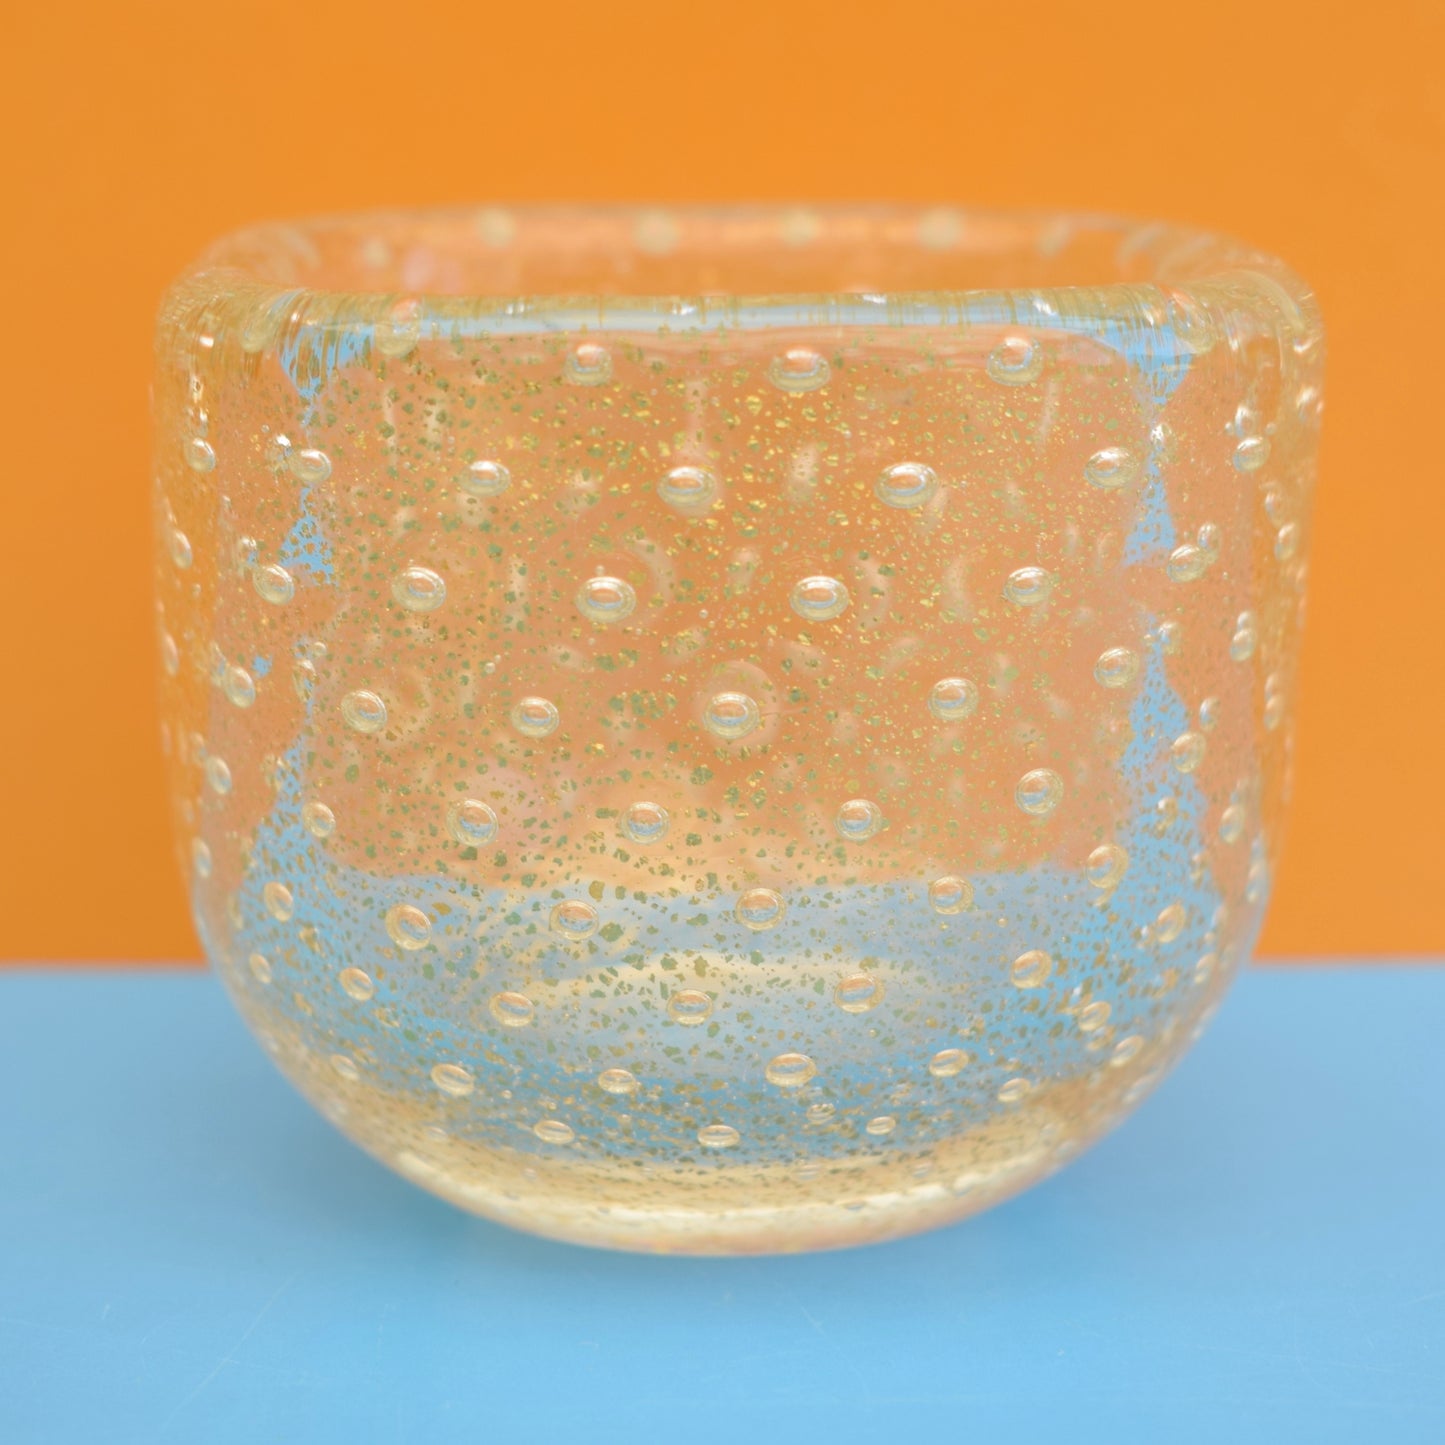 Vintage 1950s Italian Tiny Bubble Bowl - Gold Inclusions